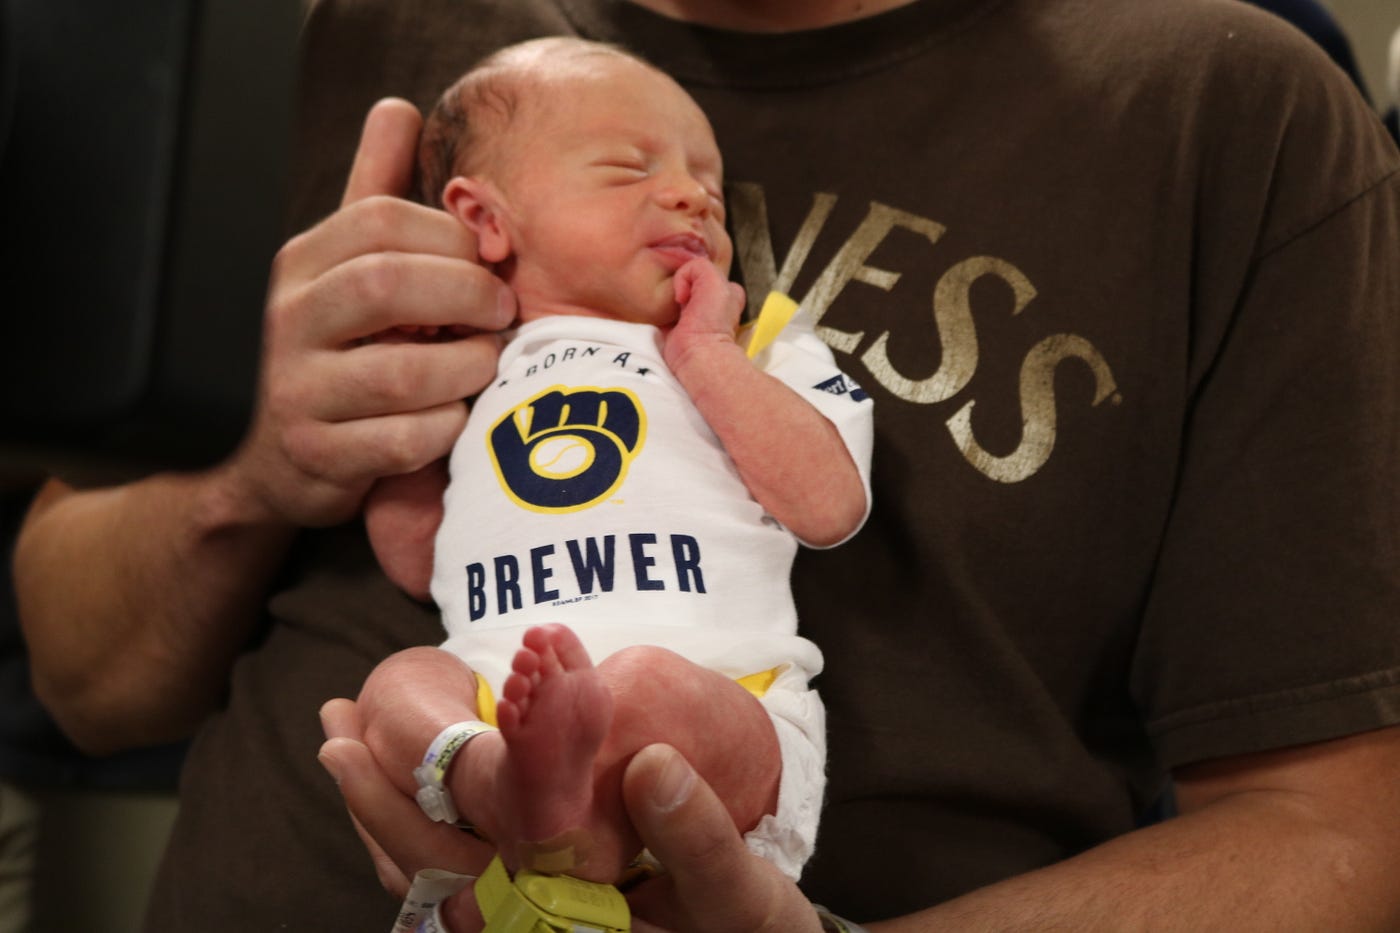 MILWAUKEE BREWERS WARMLY WELCOME NEW FANS AT FROEDTERT HOSPITAL BIRTH  CENTER ALL BABIES BORN AT FROEDTERT TO RECEIVE “BORN A BREWER” ONESIE AND  BLANKET, by Caitlin Moyer